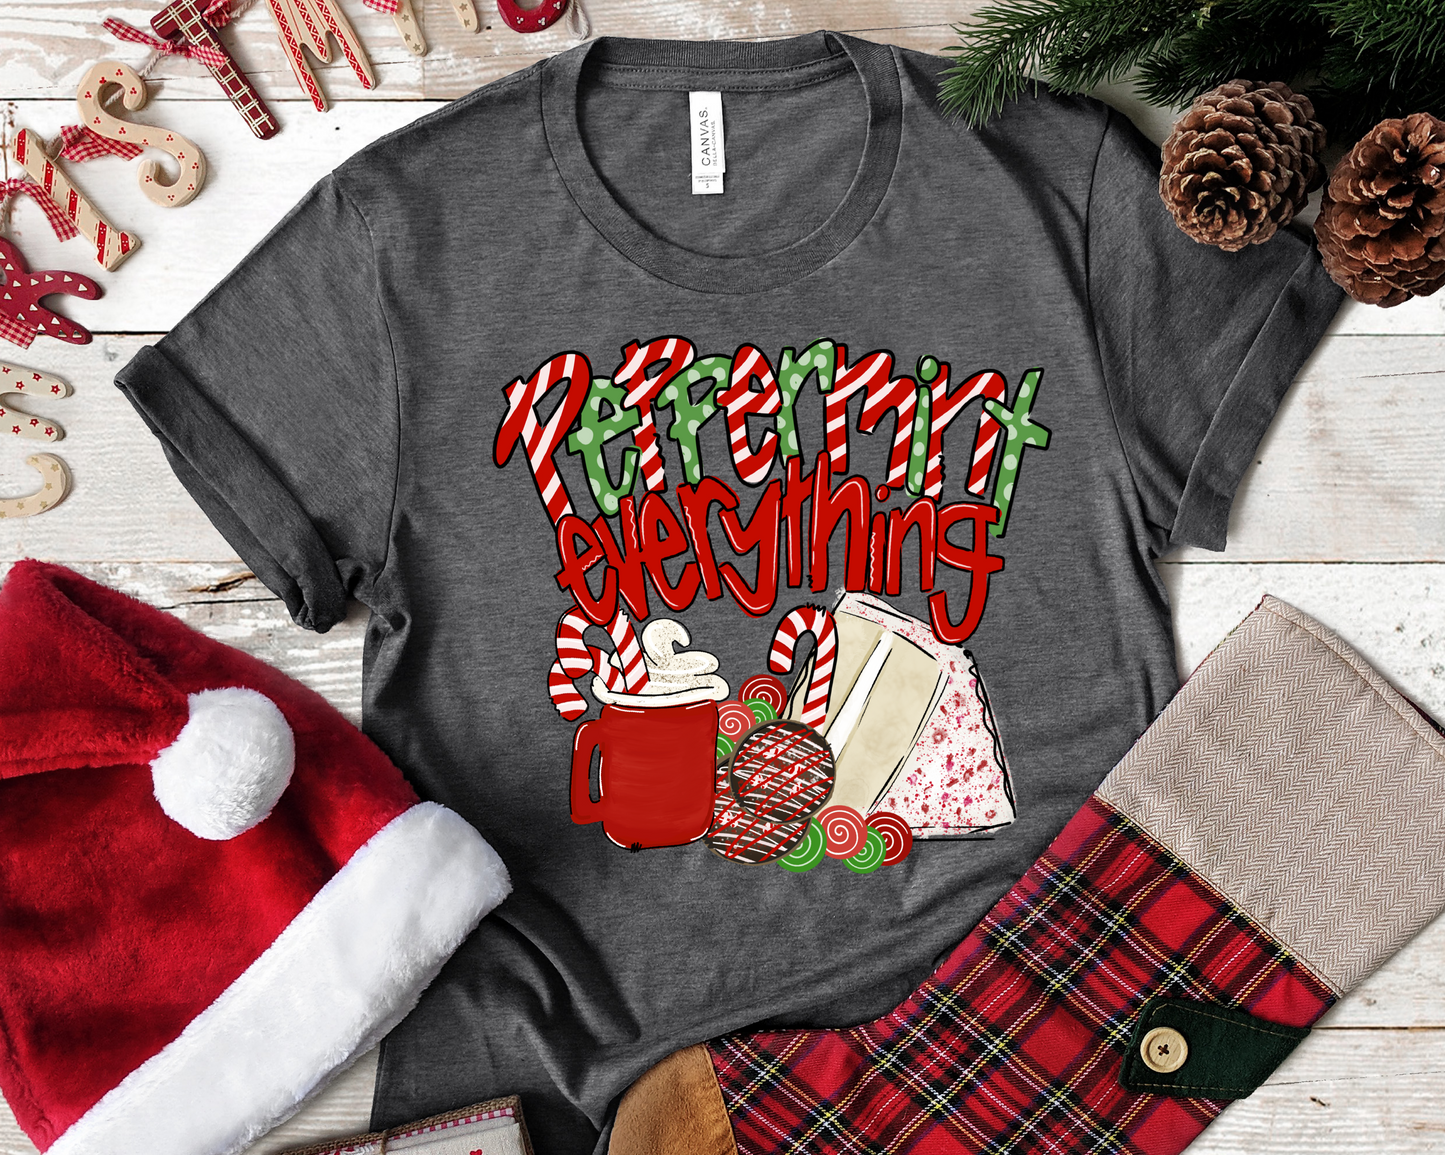 Peppermint everything cup cake Christmas DTF TRANSFERPRINT TO ORDER